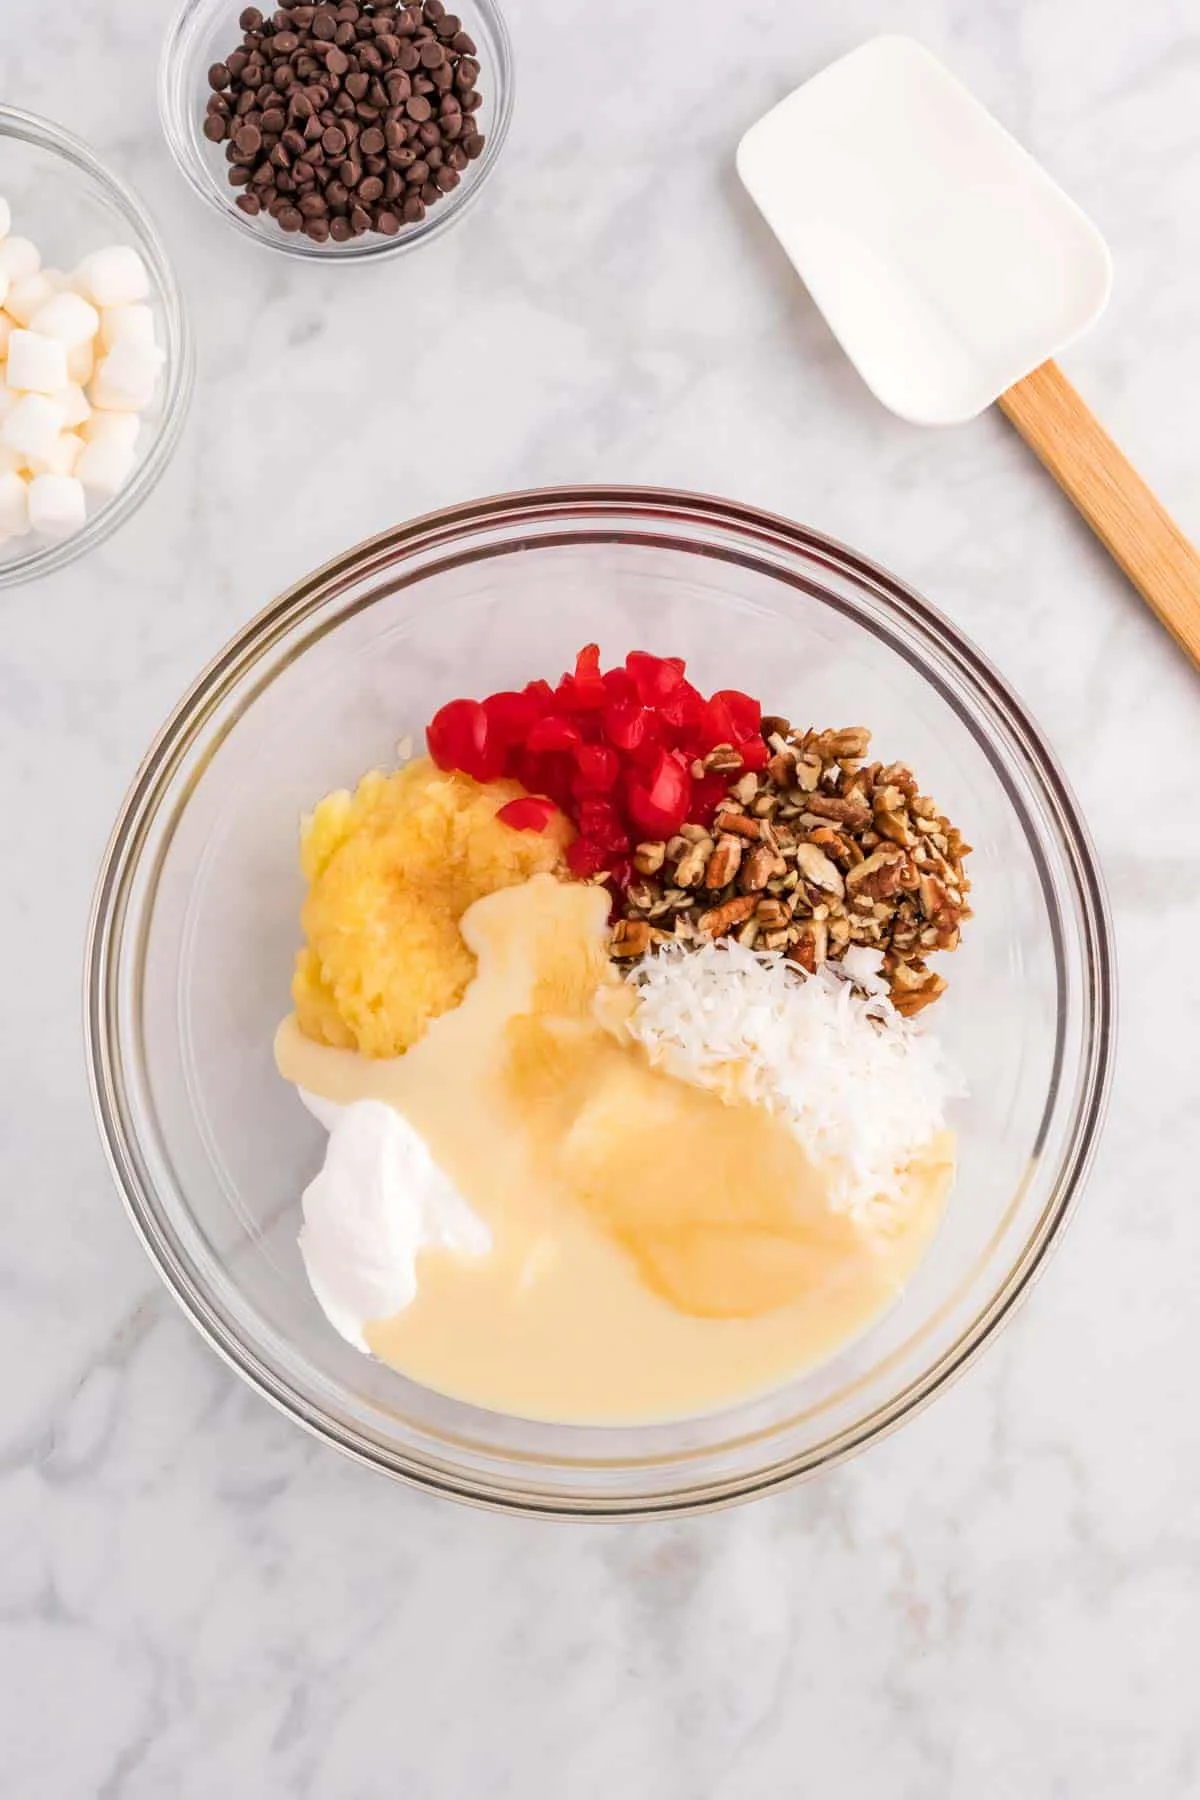 sweetened condensed milk, crushed pineapple, Cool Whip, shredded coconut, chopped pecans and chopped cherries in a bowl